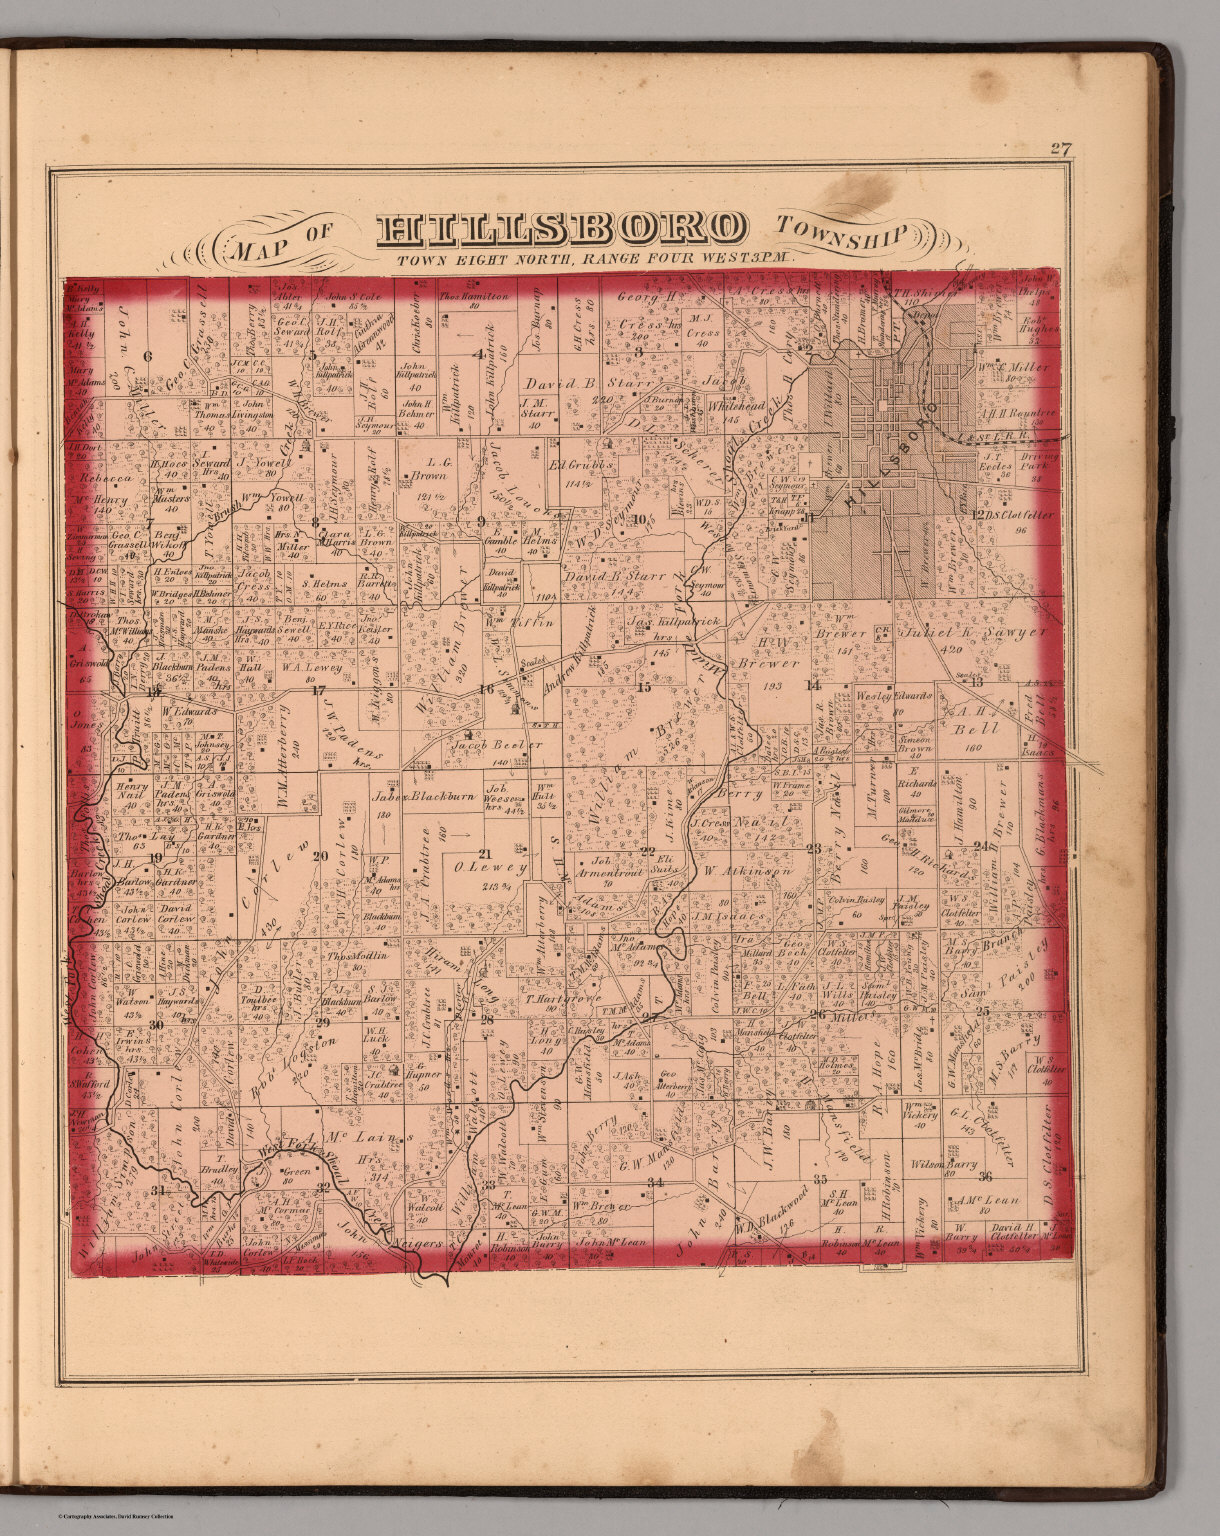 Hillsboro Township Montgomery County Illinois David Rumsey Historical Map Collection 8080